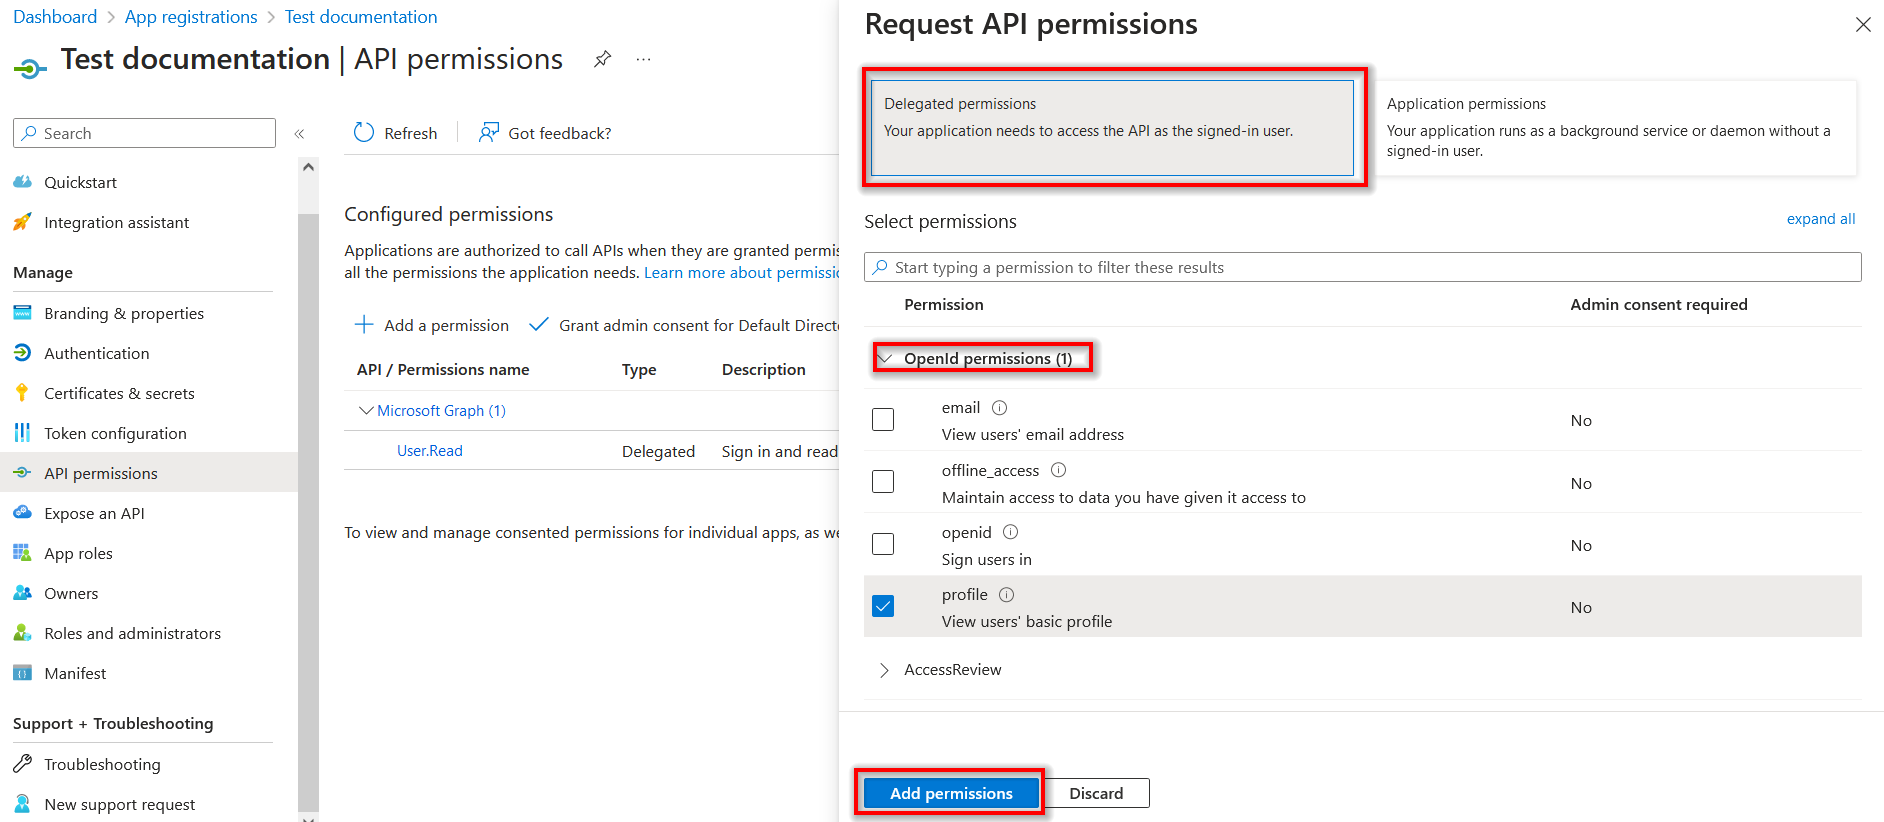 Delegated Permissions - OpenId permissions